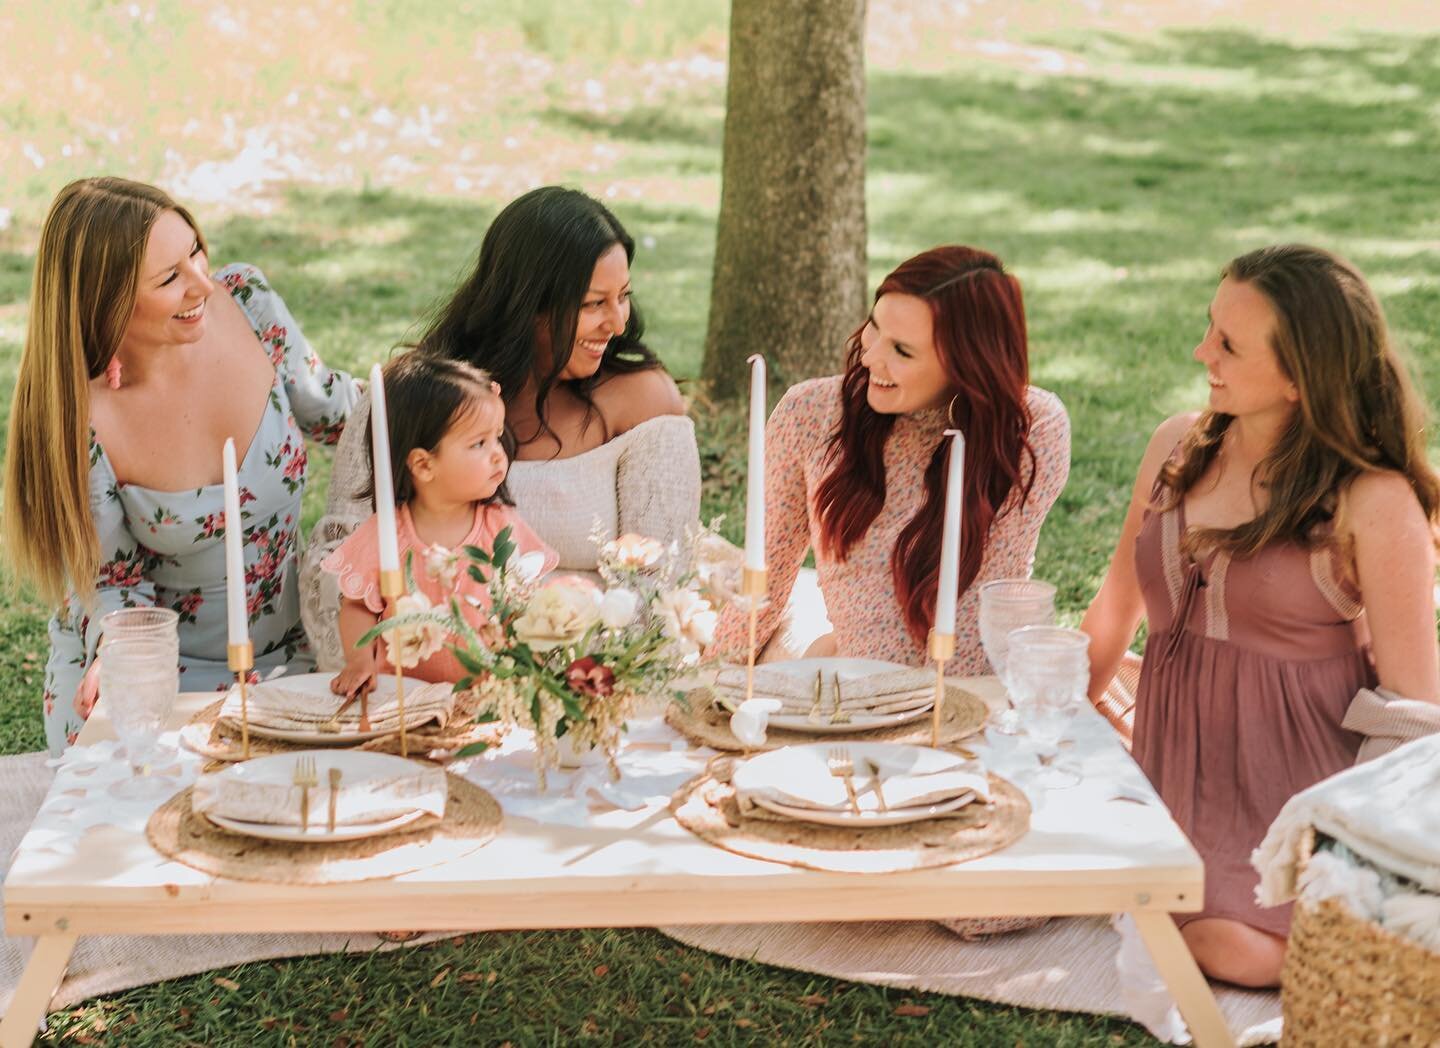 Happy Monday! How was your weekend? 
⠀⠀⠀⠀⠀⠀⠀⠀⠀
Who had a #girlsday with their besties?!
⠀⠀⠀⠀⠀⠀⠀⠀⠀
Planning &amp; Design | @valeriecoraevents
Luxe Picnic | @vivalapicnic
Florals | @sileneandsloanflorals
Photography | @annecsalas
⠀⠀⠀⠀⠀⠀⠀⠀⠀
#ocweddingfl